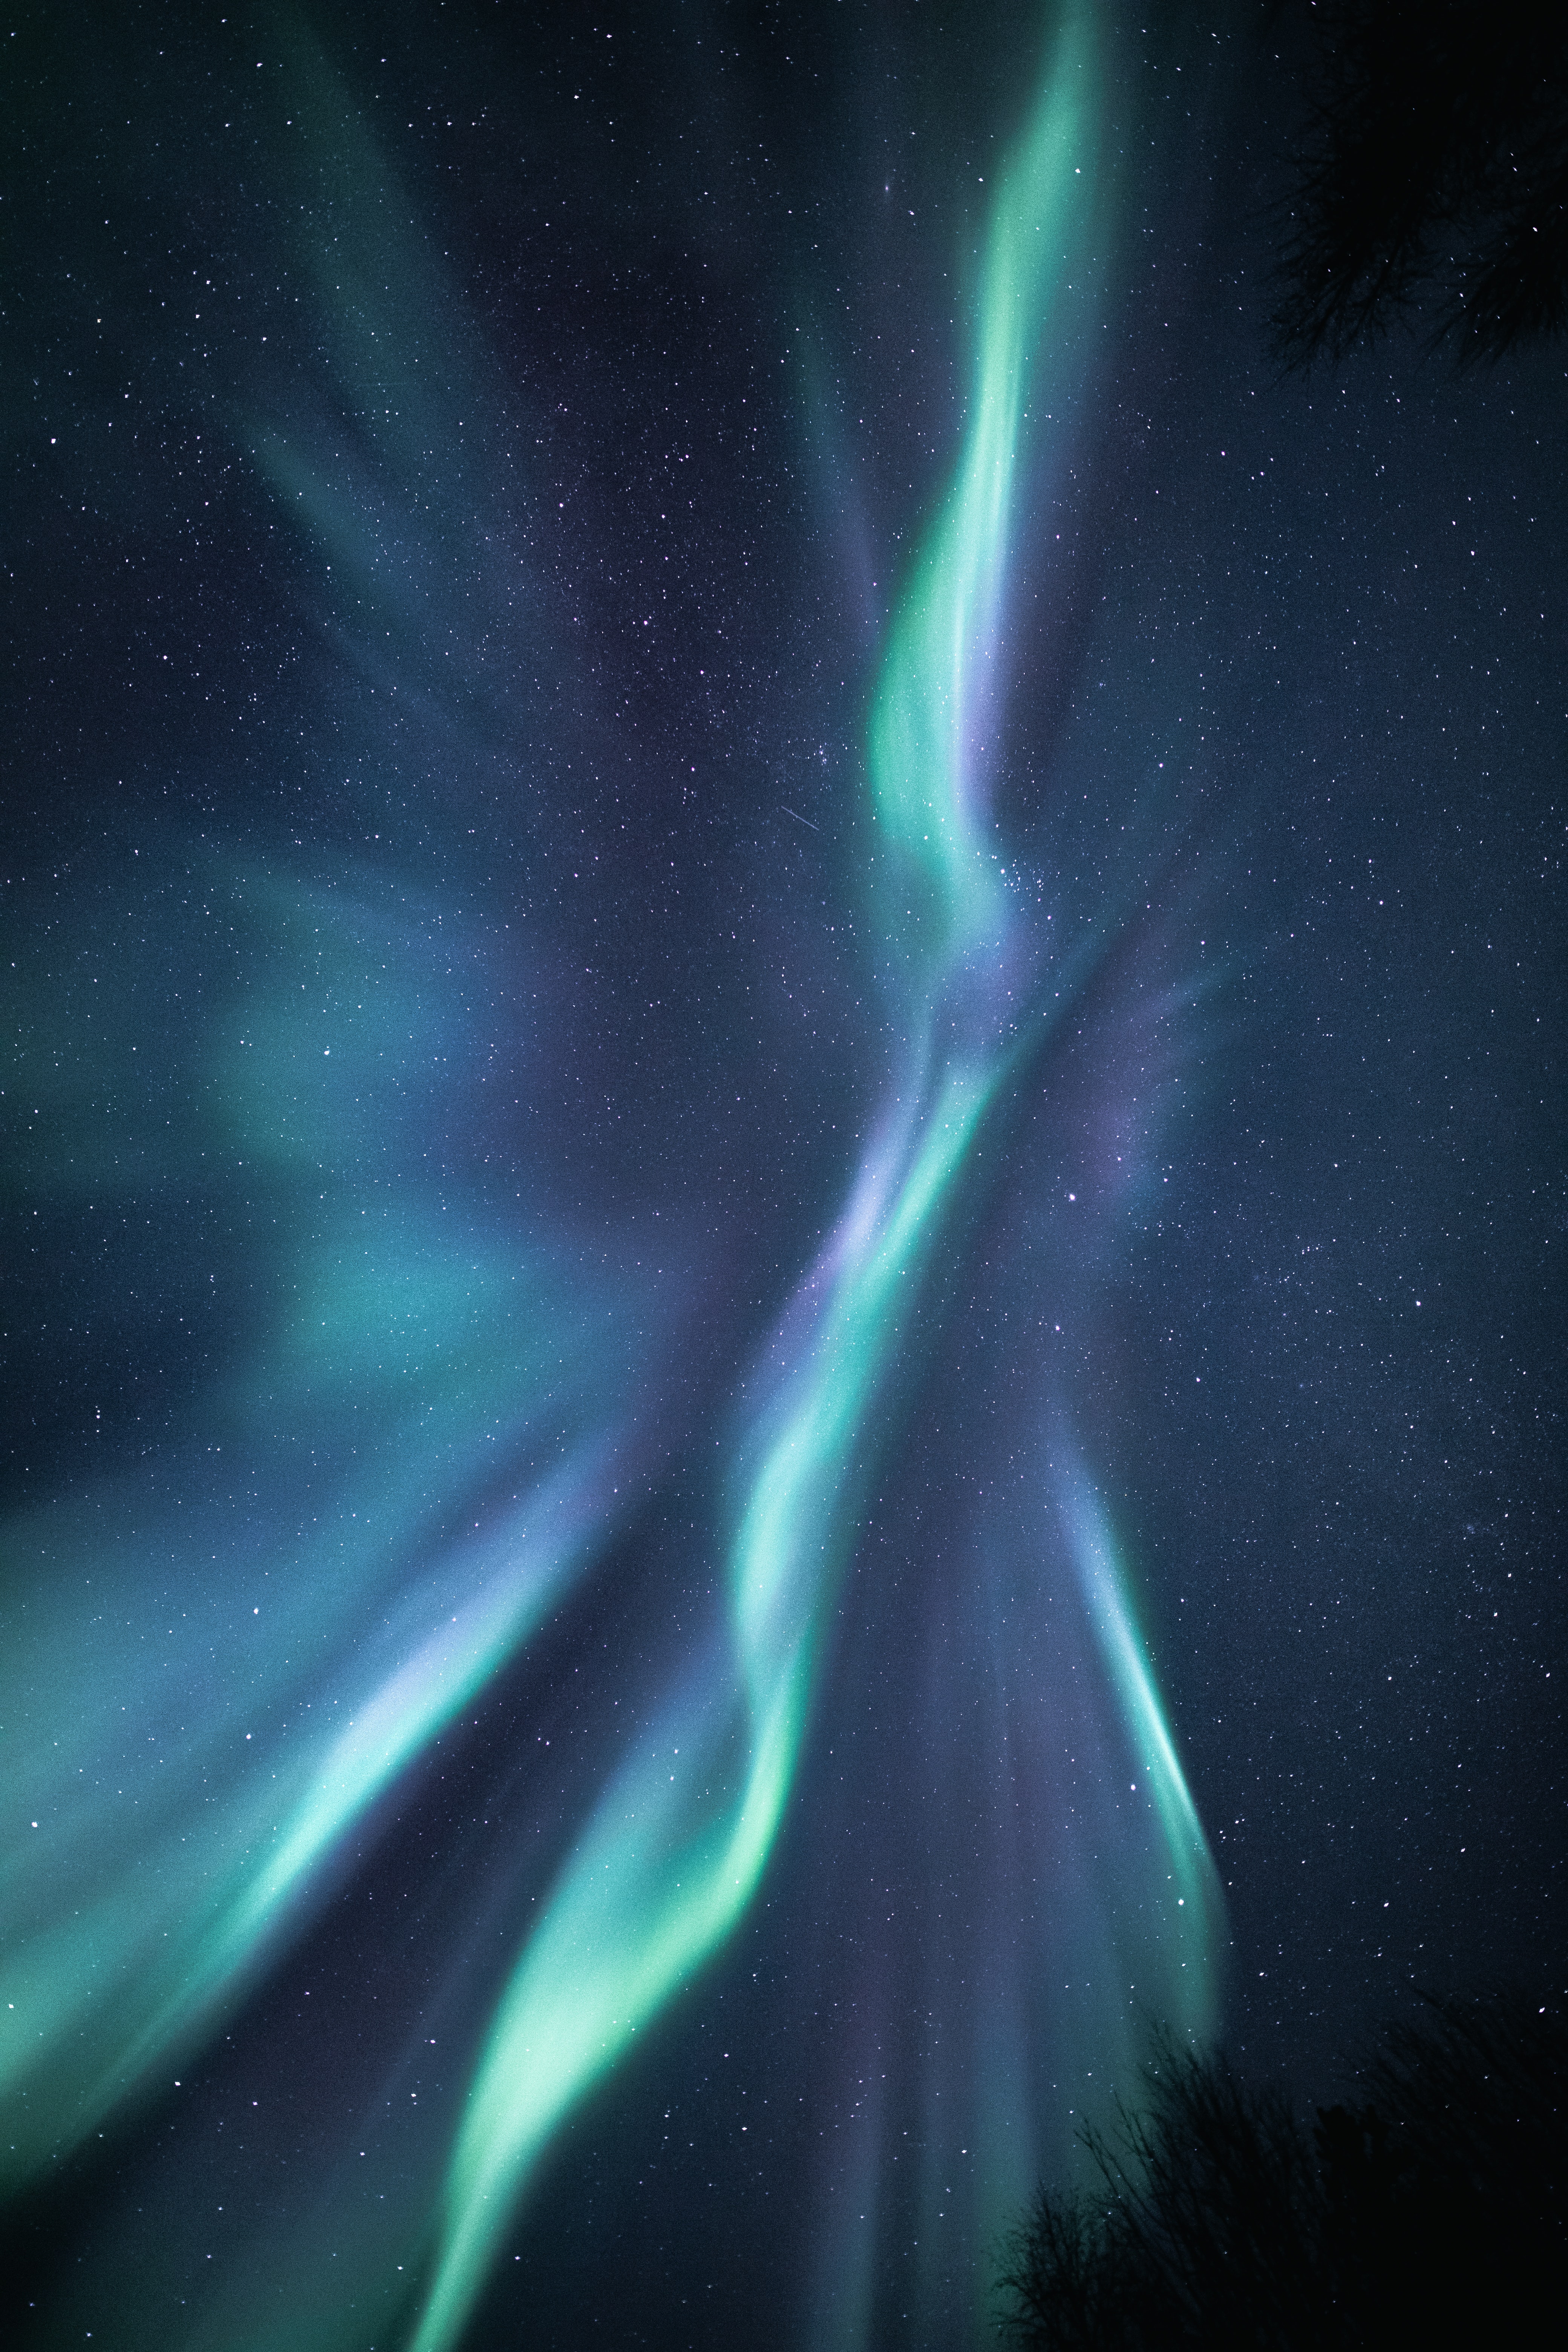 The aurora in the night sky glowing green and blue